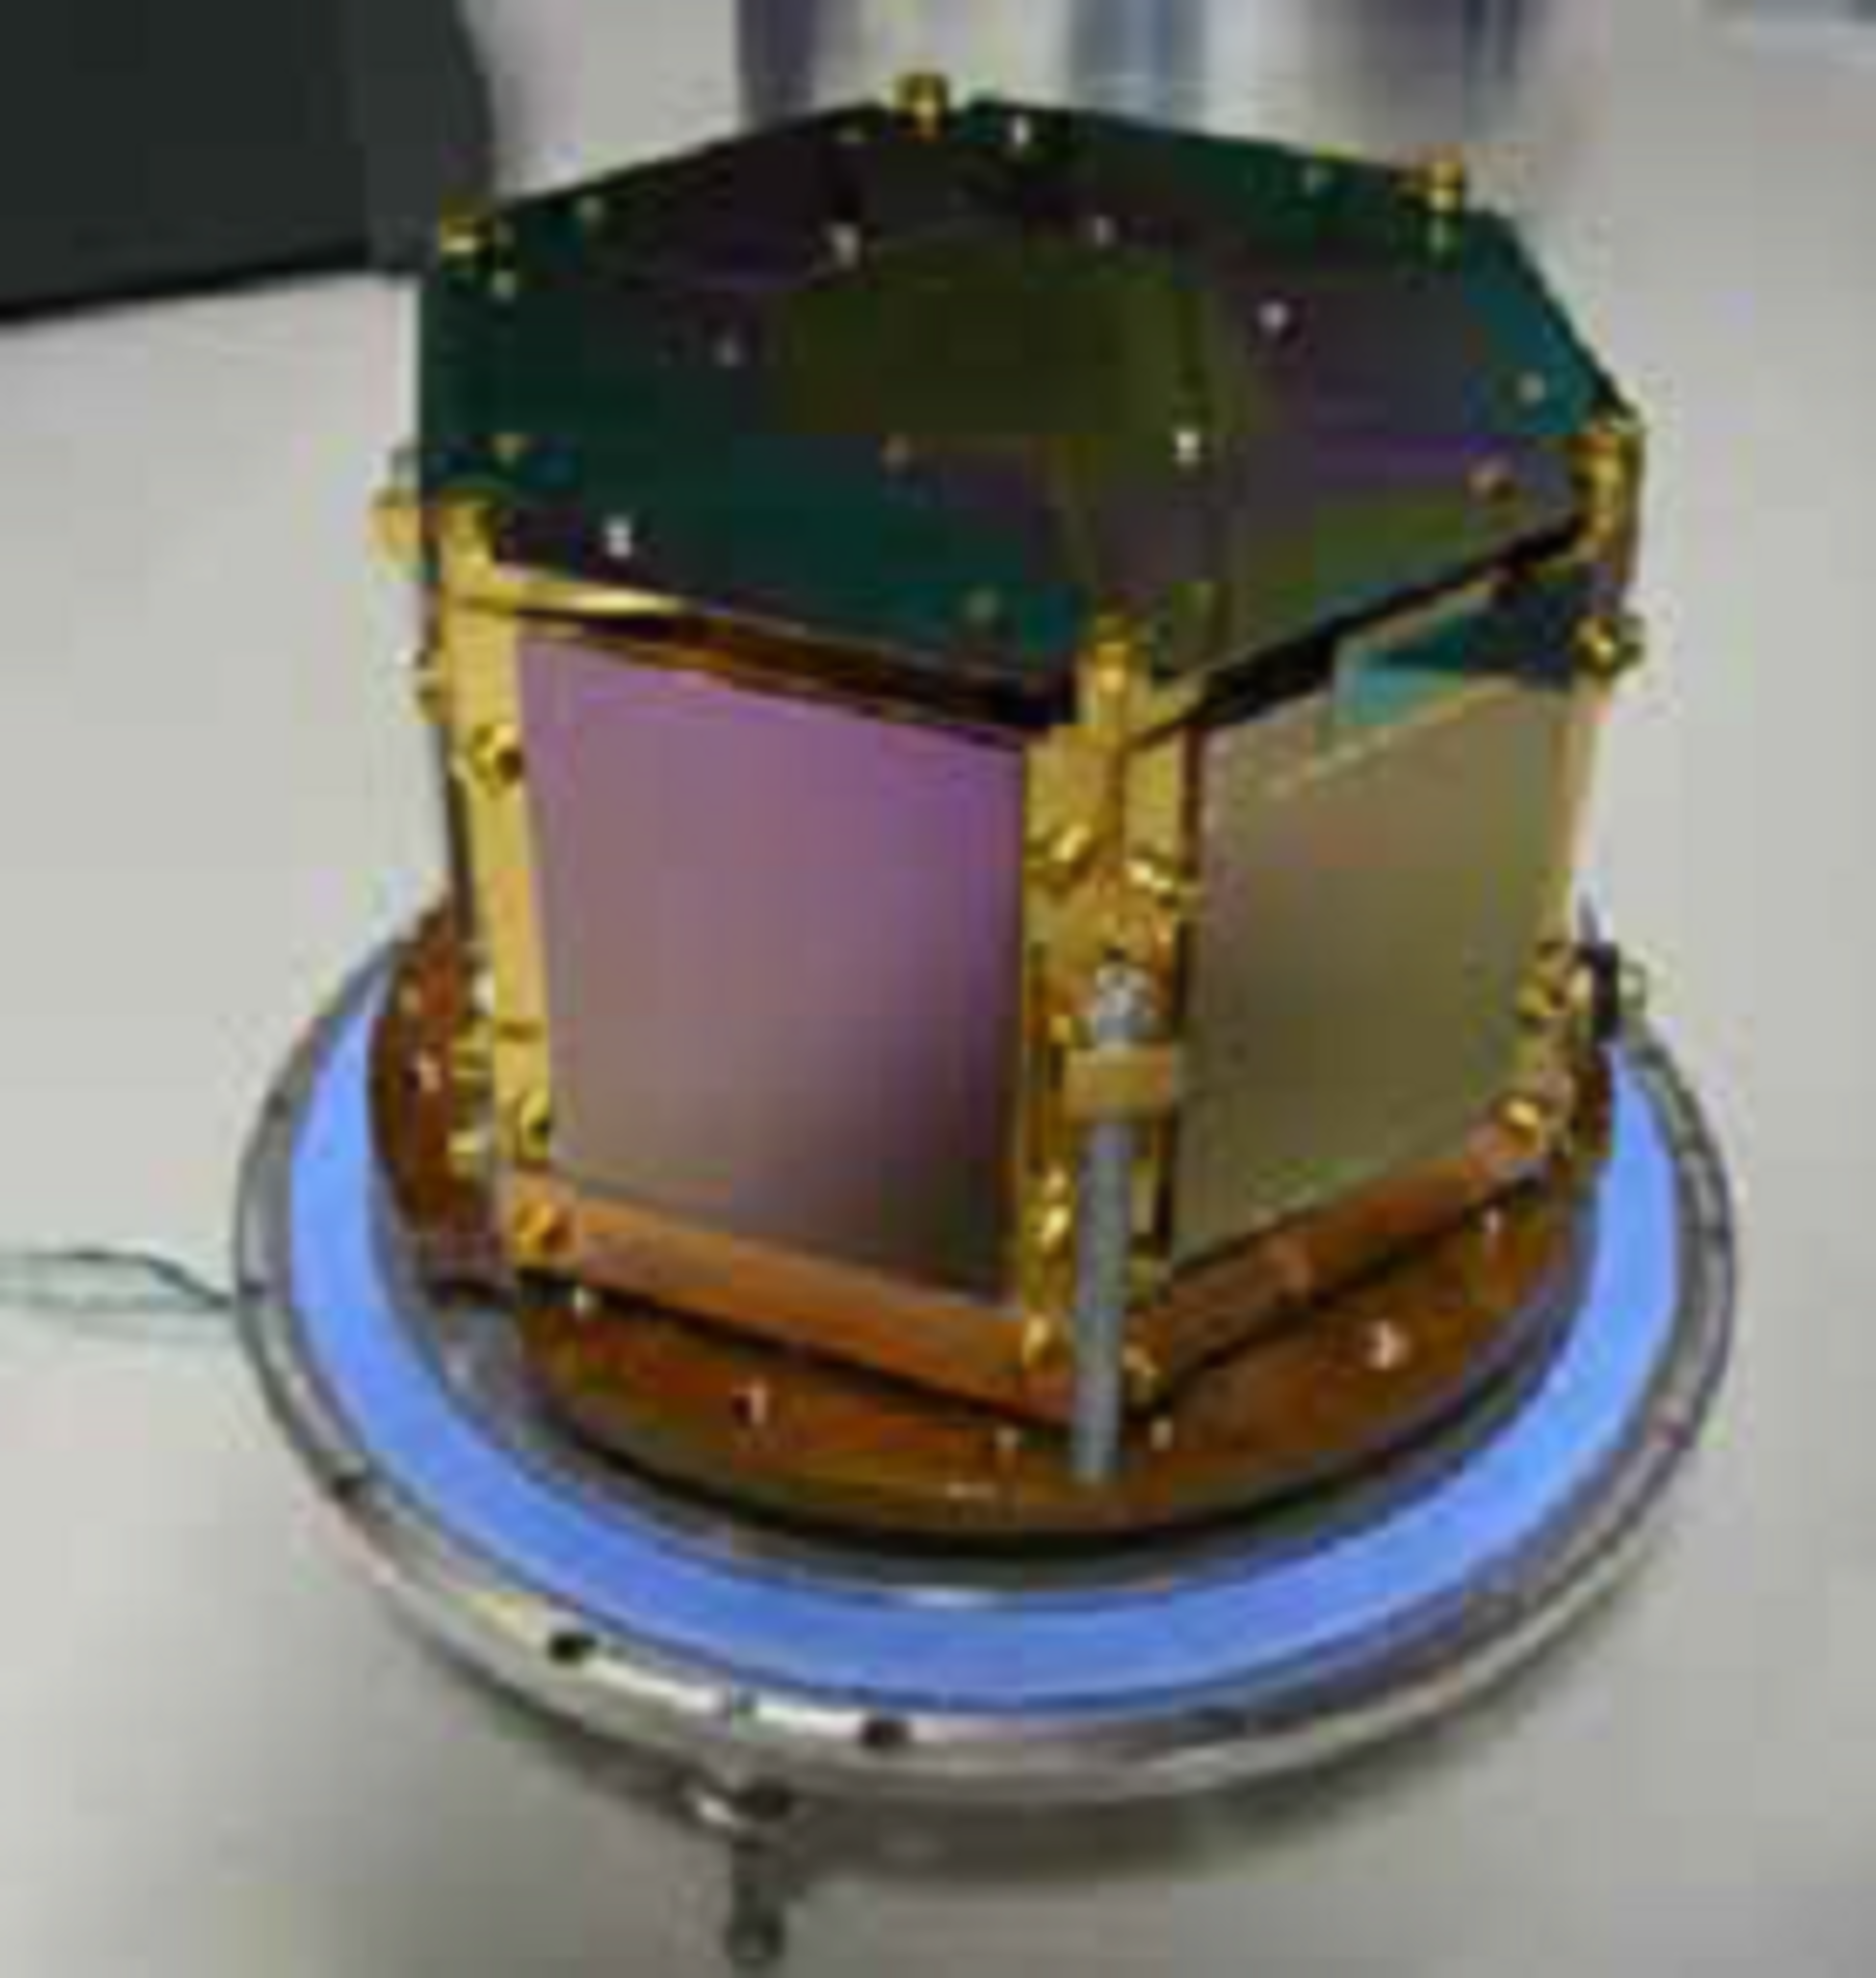 Mechanical prototype of a 50 mK detector